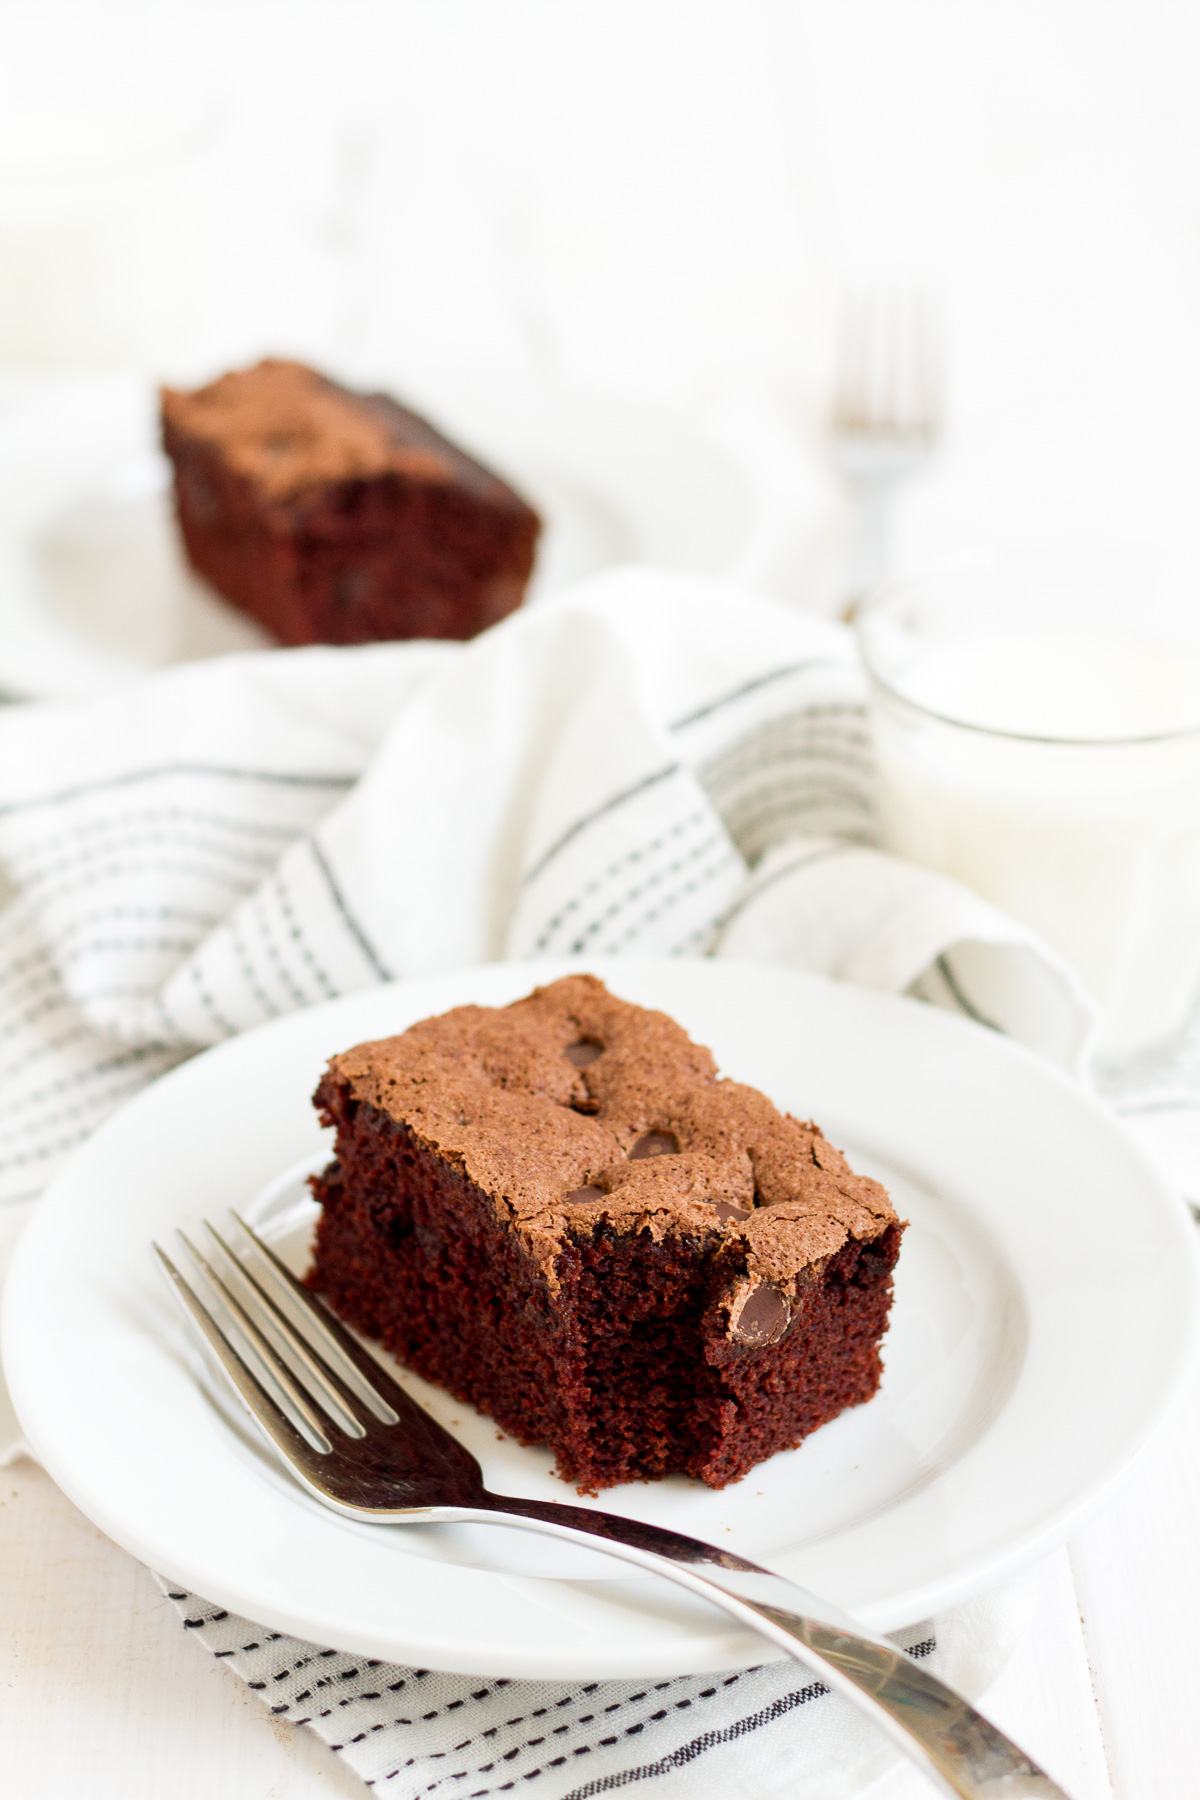 This super simple one-bowl double chocolate cake is easy and delicious!